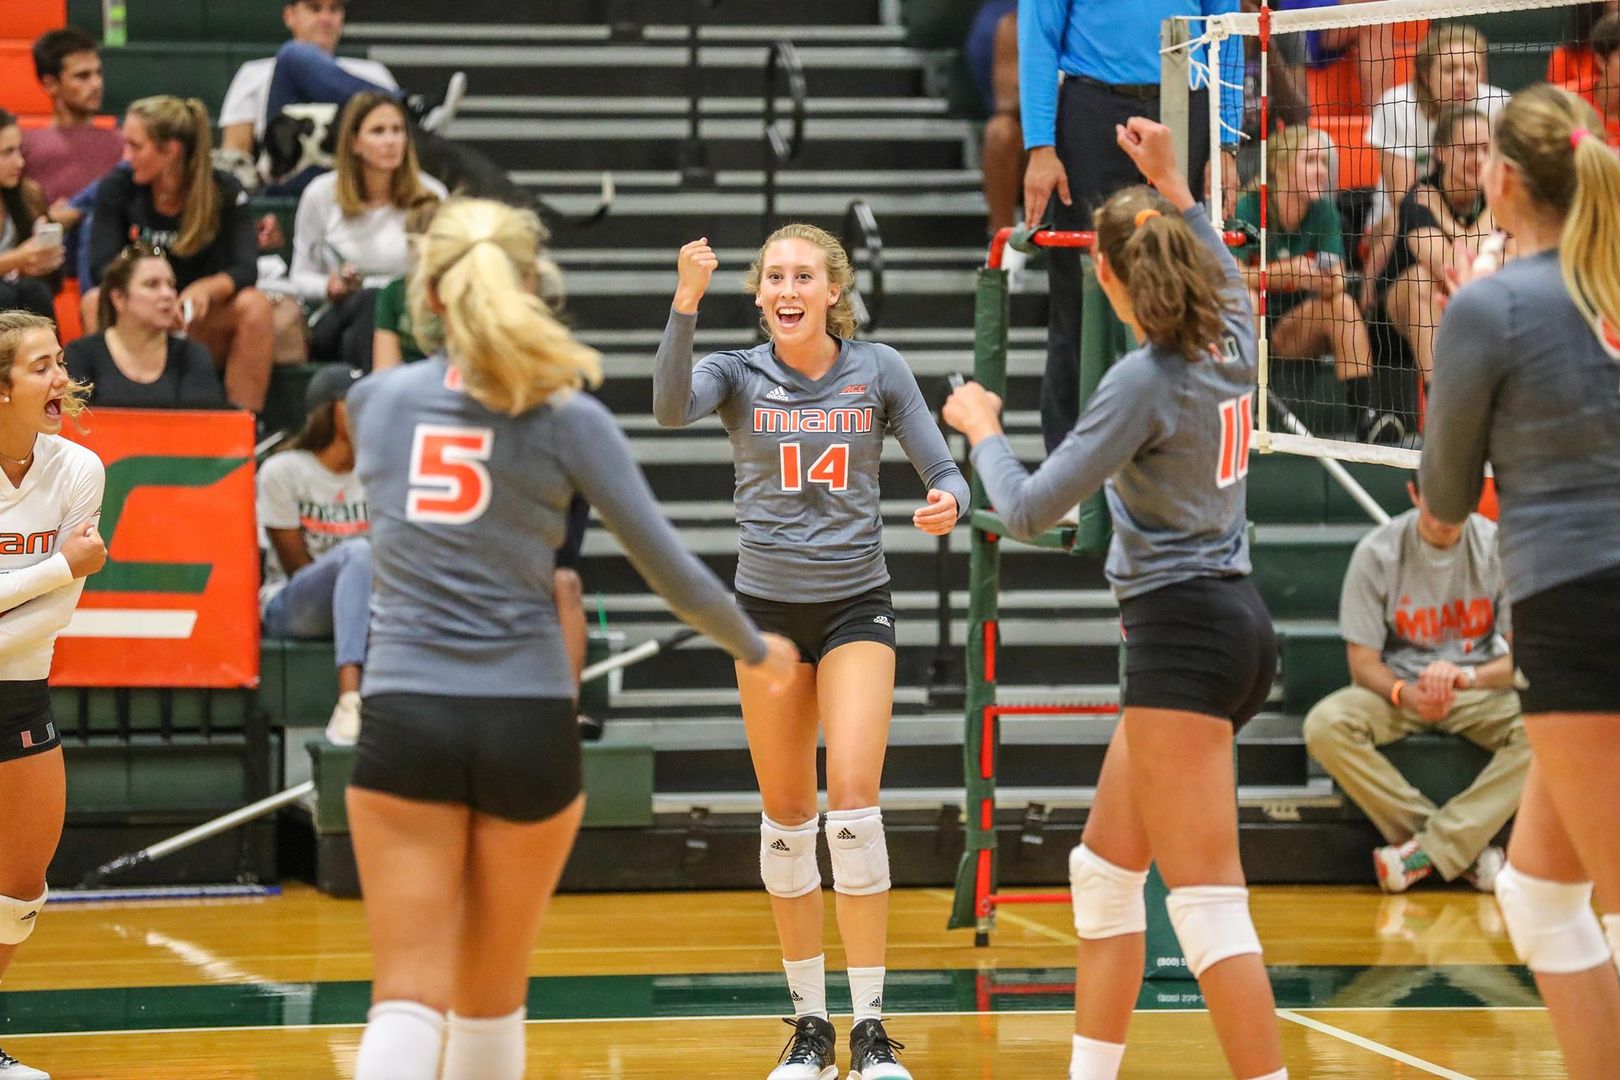 Canes Down Virginia Tech 3-1 at Home in ACC Opener